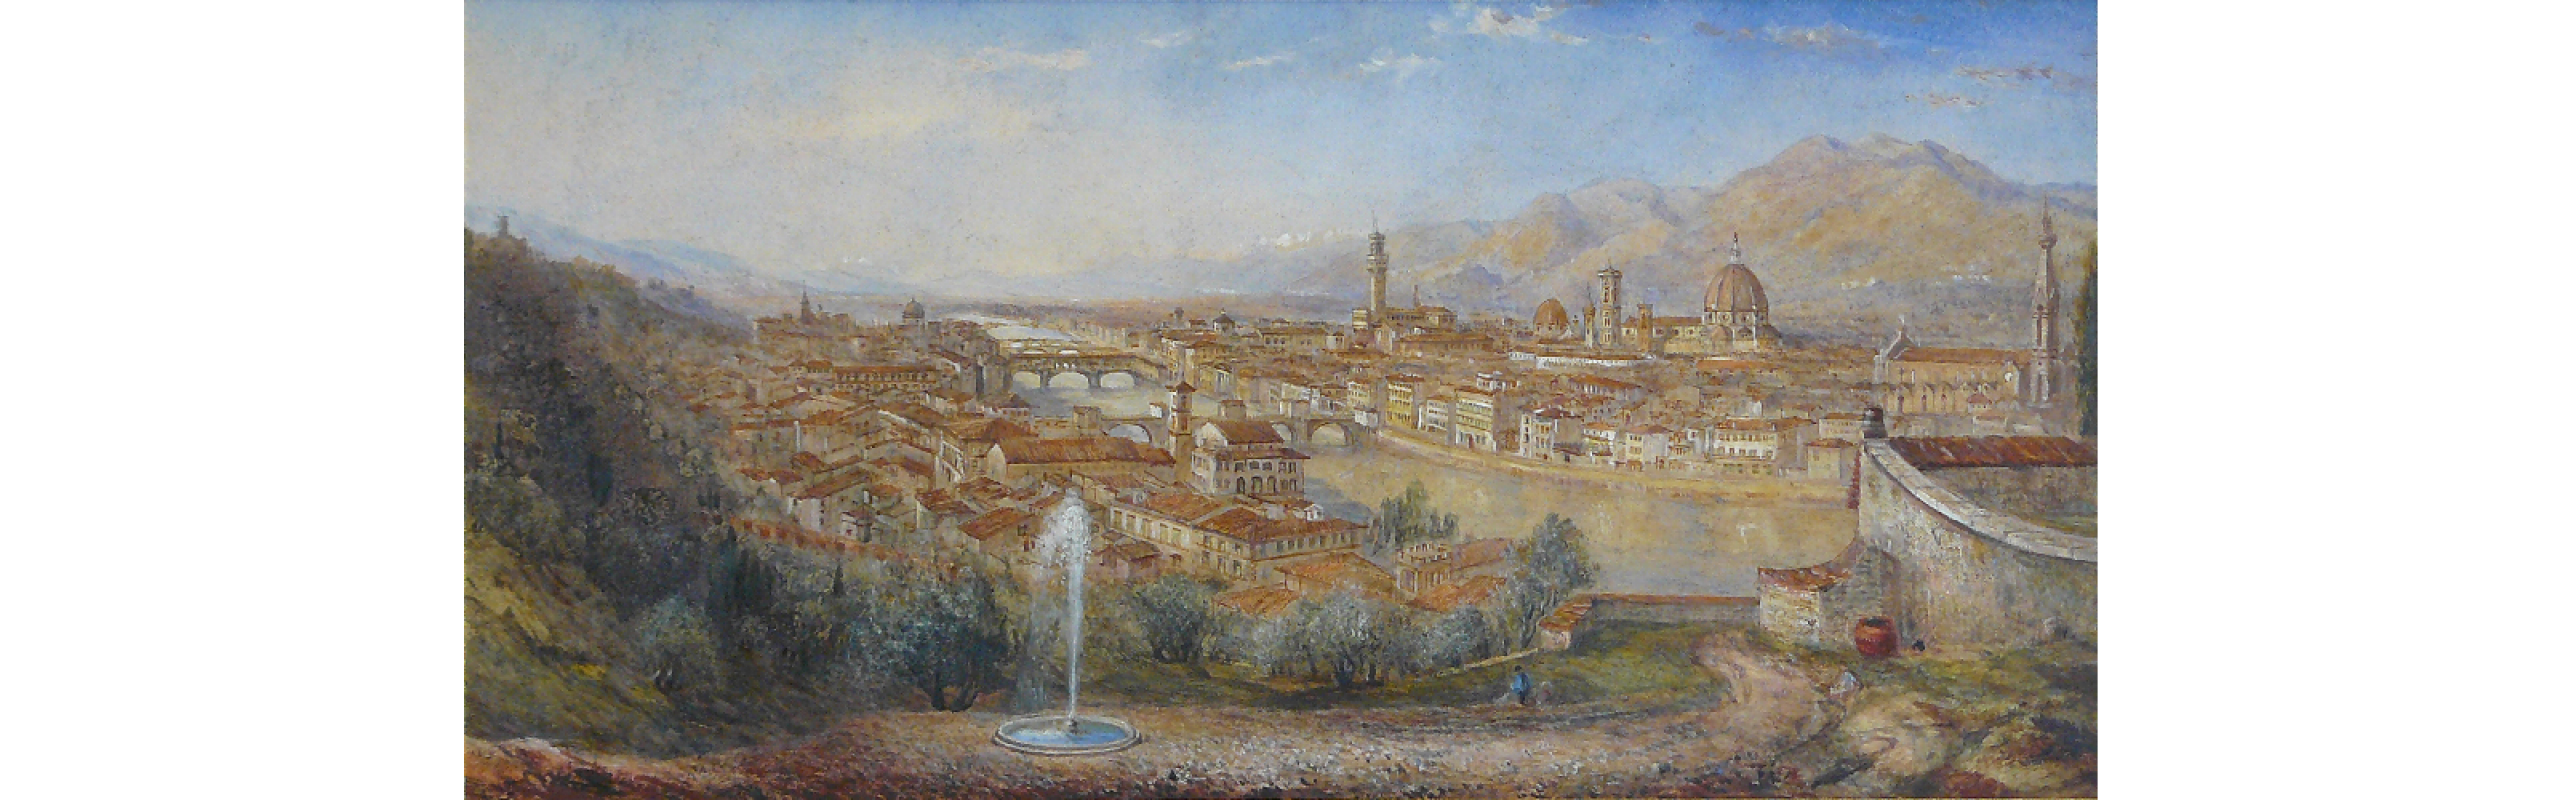 Some nineteenth-century literary visitors to Florence